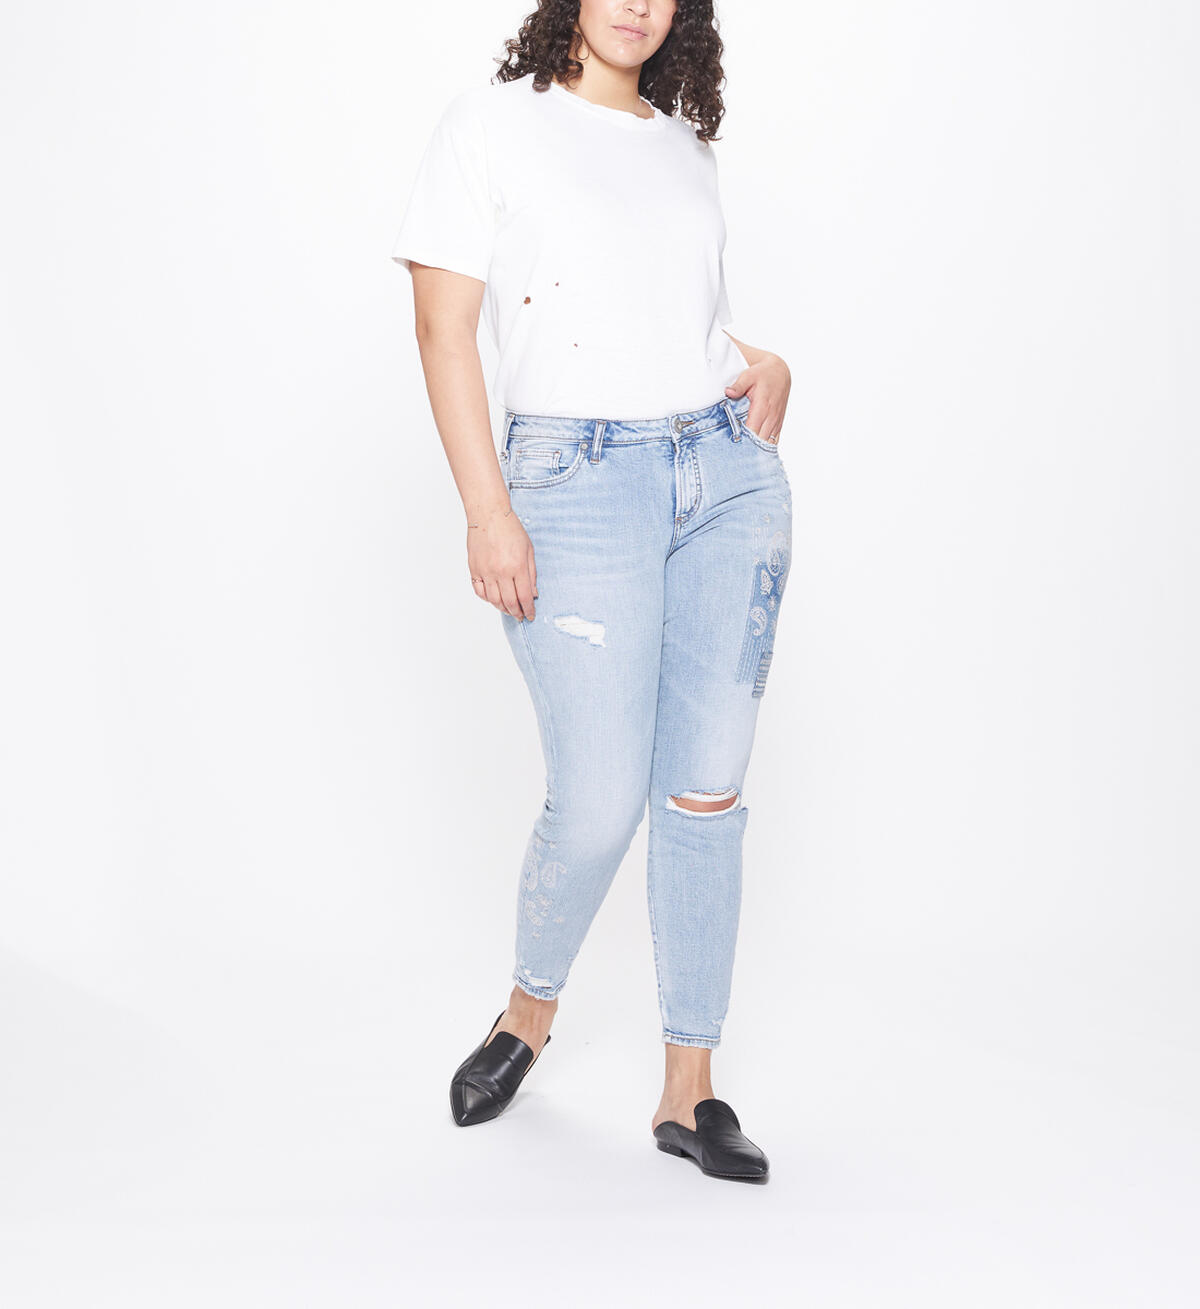 Aiko Mid Rise Ankle Skinny Jeans Plus Size Final Sale, , hi-res image number 3